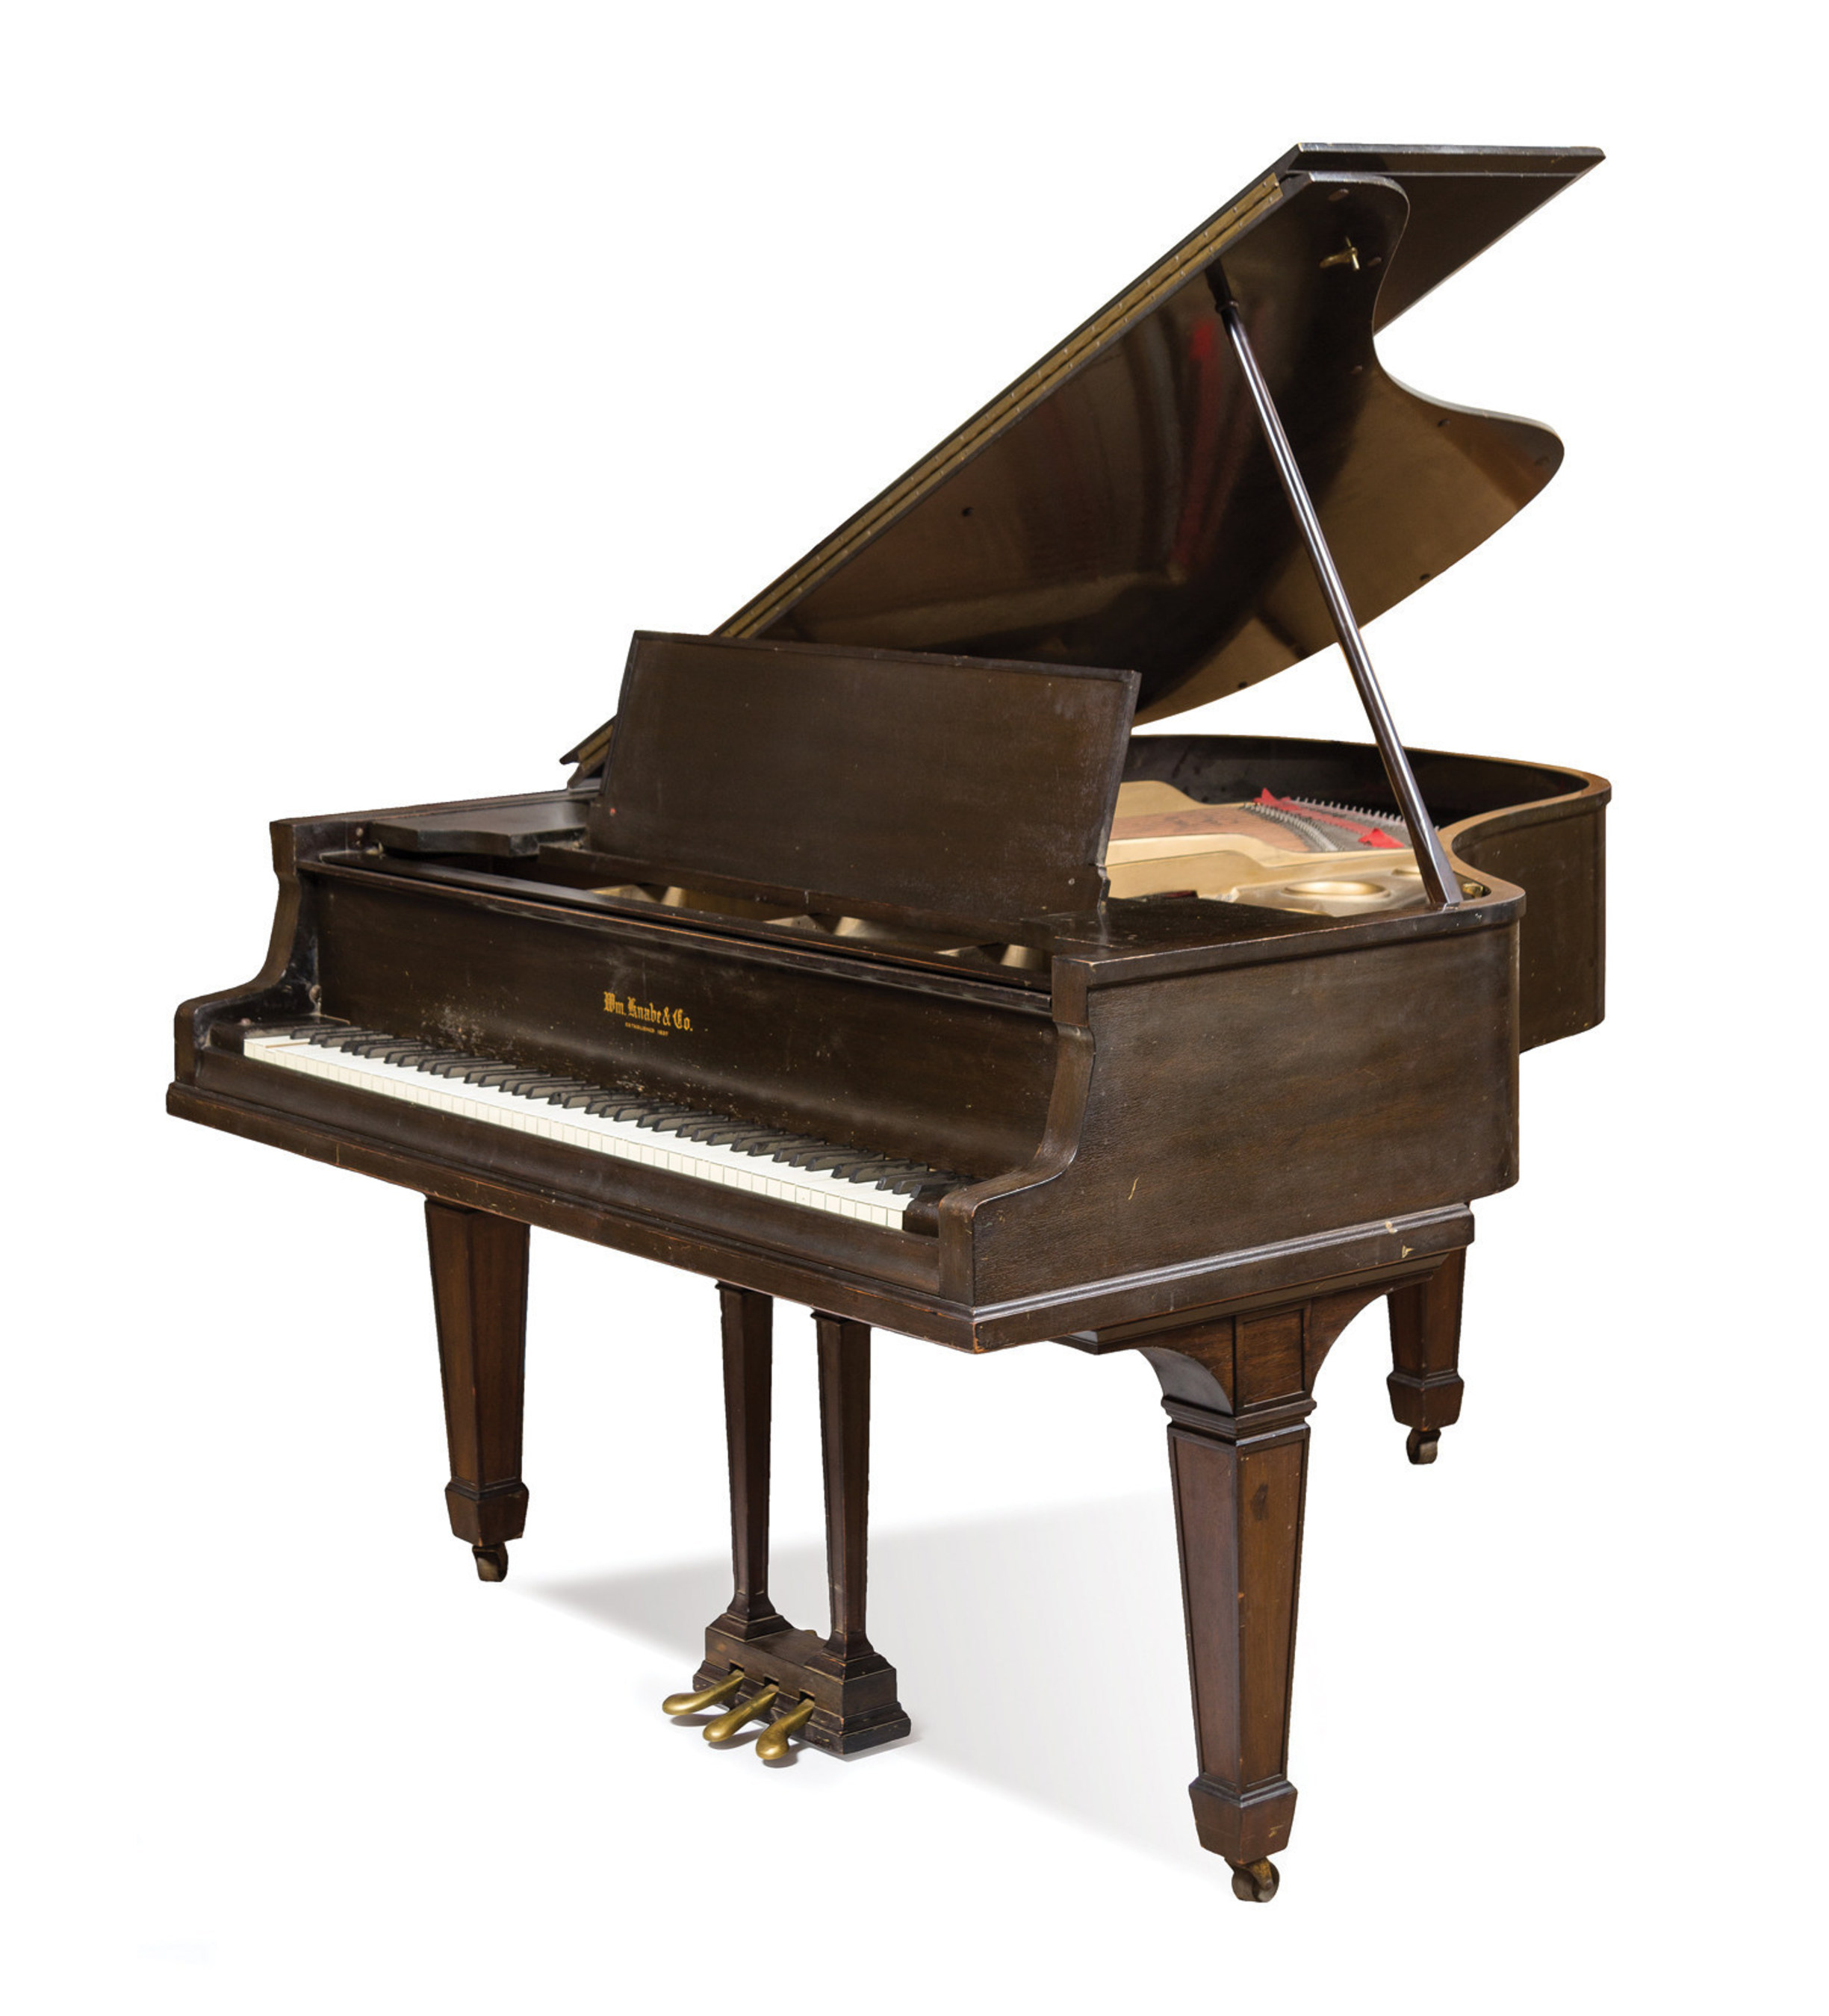 The Wm. Knabe & Co. baby grand piano, circa 1925, used by Elton John to write Rock of the Westies, "Philadelphia Freedom" and "Don't Let the Sun Go Down on Me." This piano was housed in Caribou Ranch's Ouray cabin and used by other artists such as Michael Jackson, Frank Zappa, Stephen Stills, Dan Fogelberg, Peter Cetera and many more. The piano is one of many for sale at auction by Leslie Hindman Auctioneers on January 24.